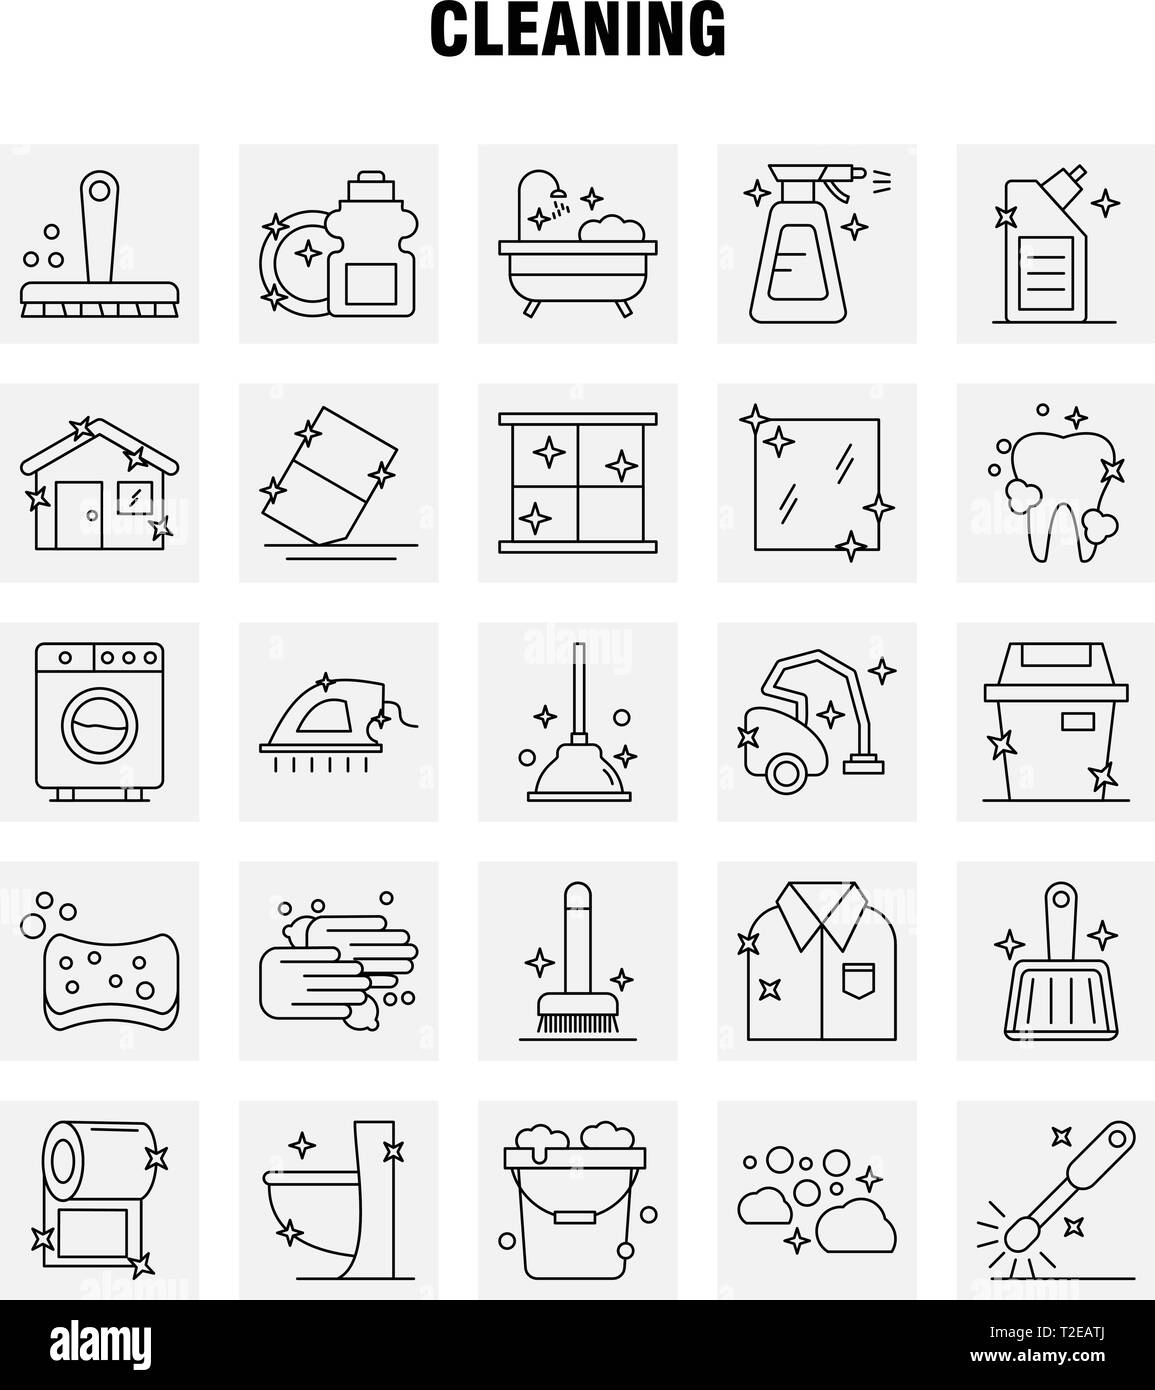 Cleaning Line Icons Set For Infographics, Mobile UX/UI Kit And Print Design. Include: Brush, Brushing, Clean, Scrub, Plunger, Restroom, Toilet, Tool,  Stock Vector